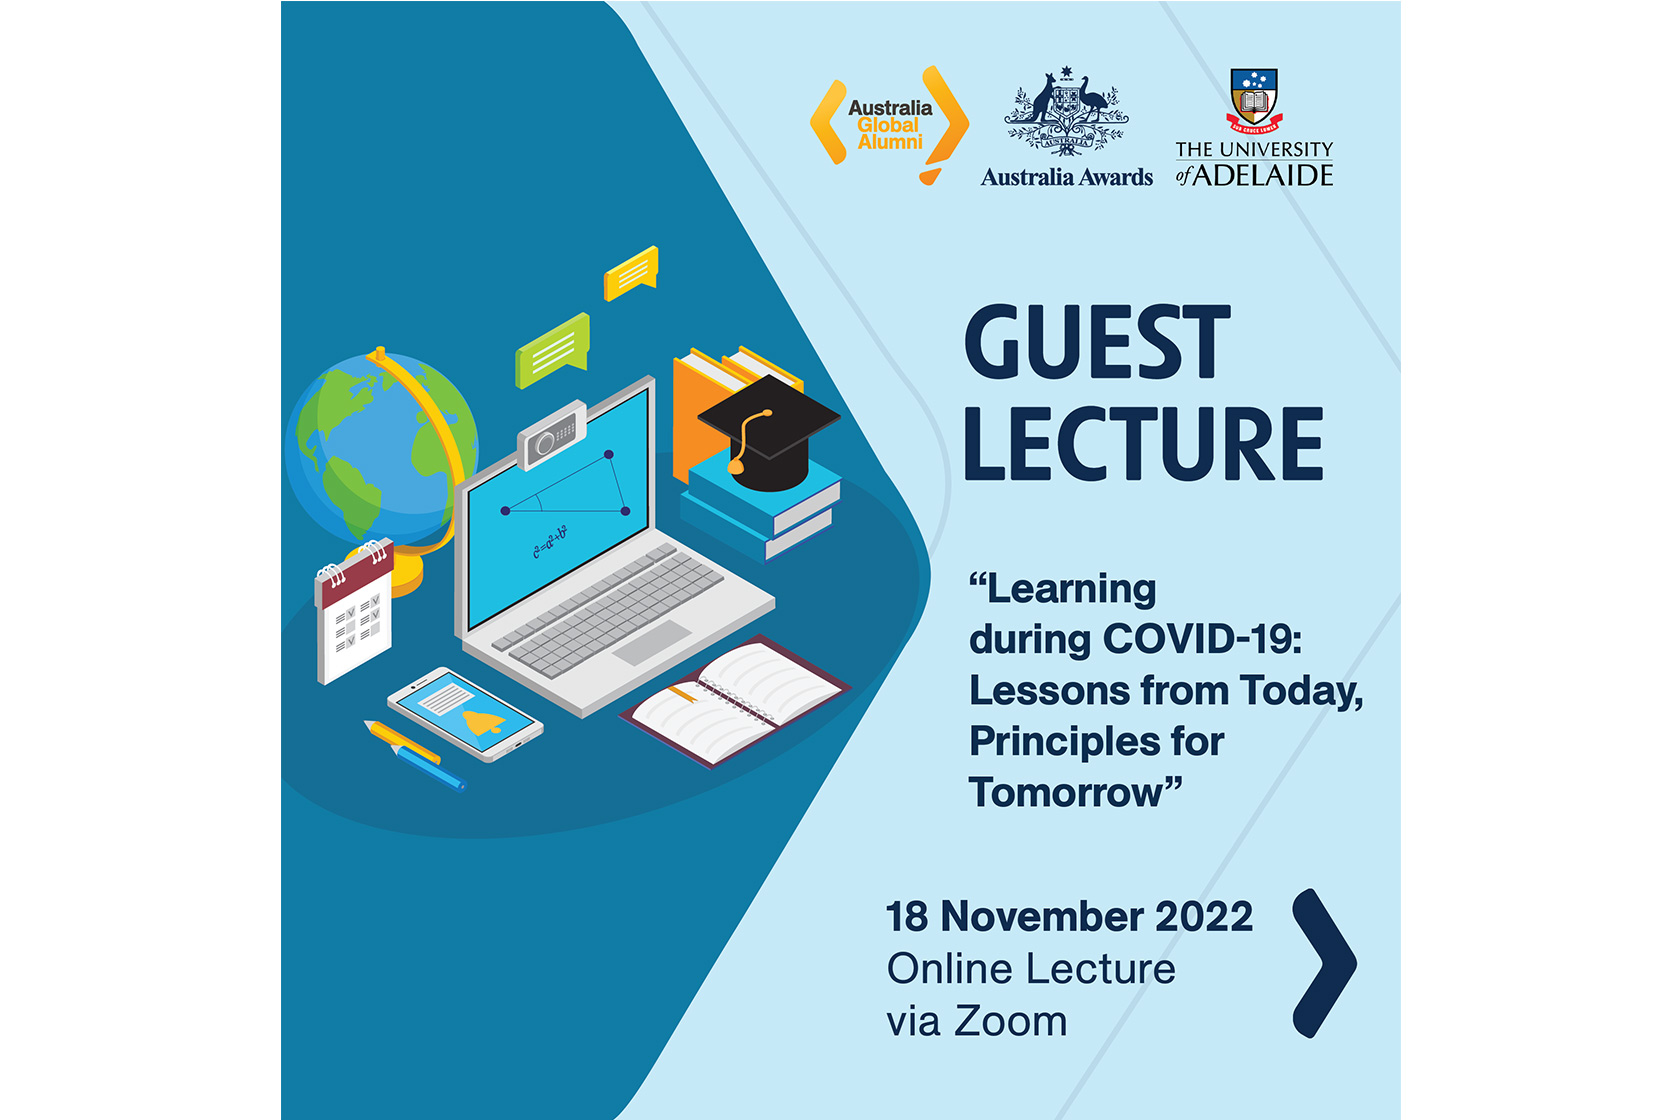 Join Our Online Lecture on “Learning during COVID-19: Lessons from Today, Principles for Tomorrow”